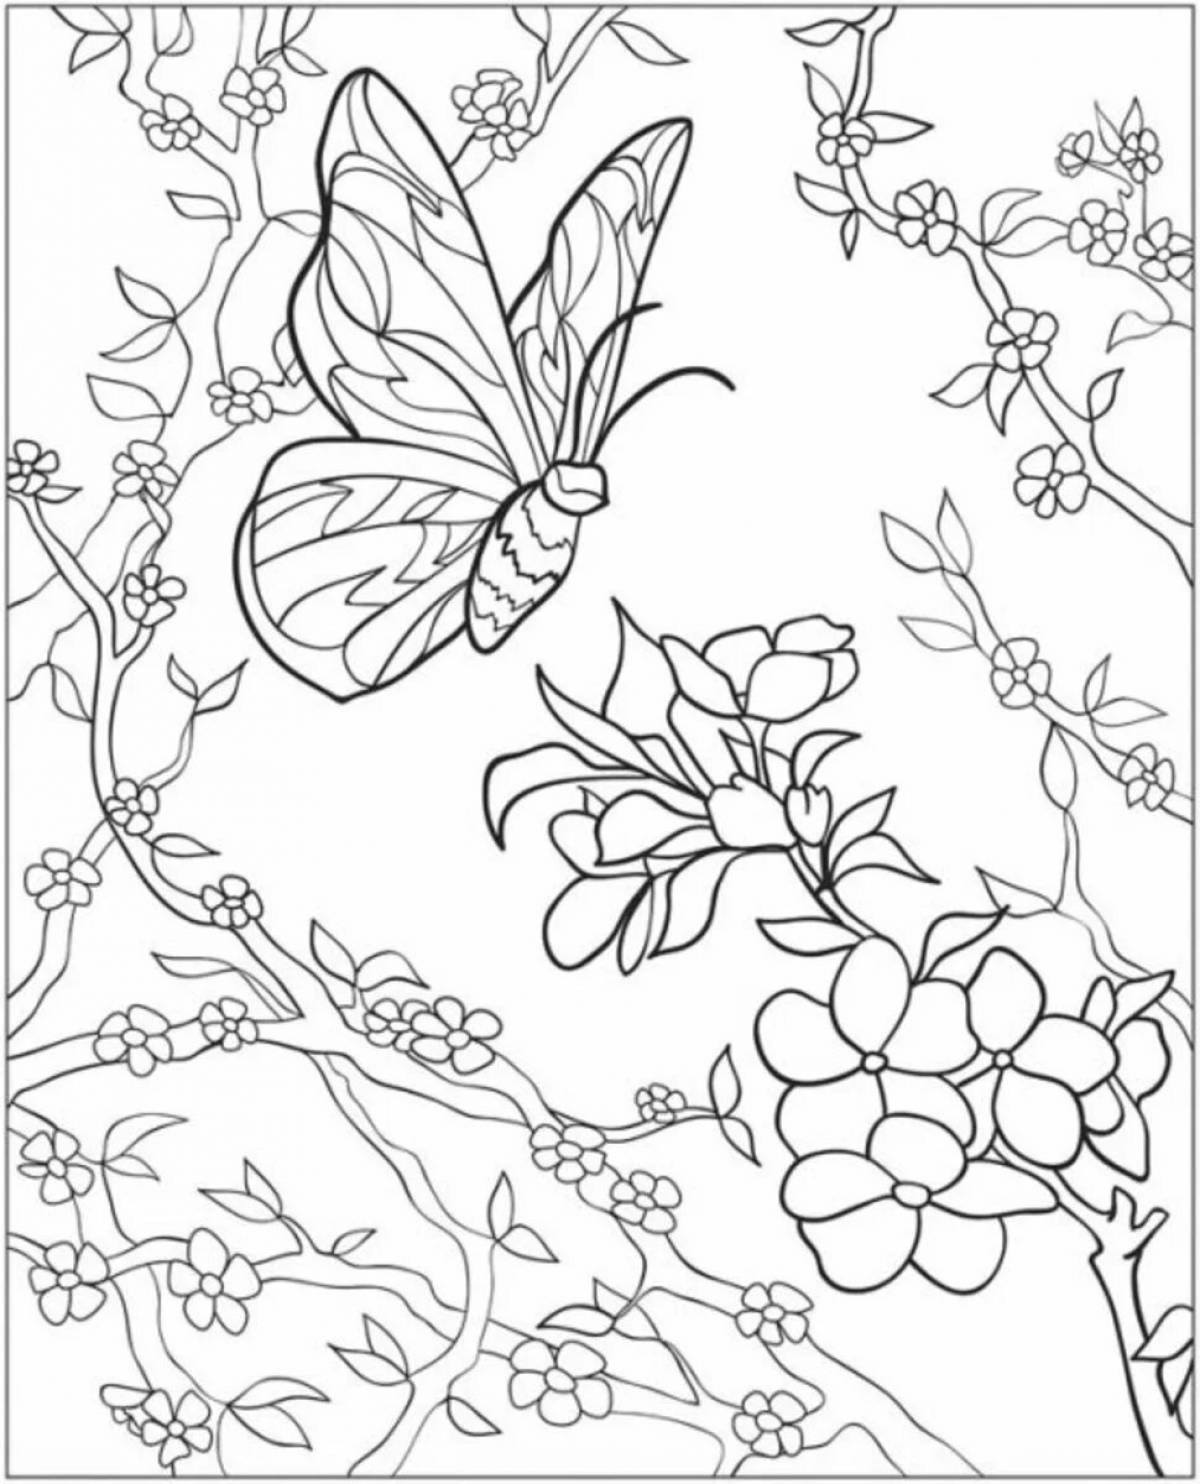 Tempting coloring for stained glass paints